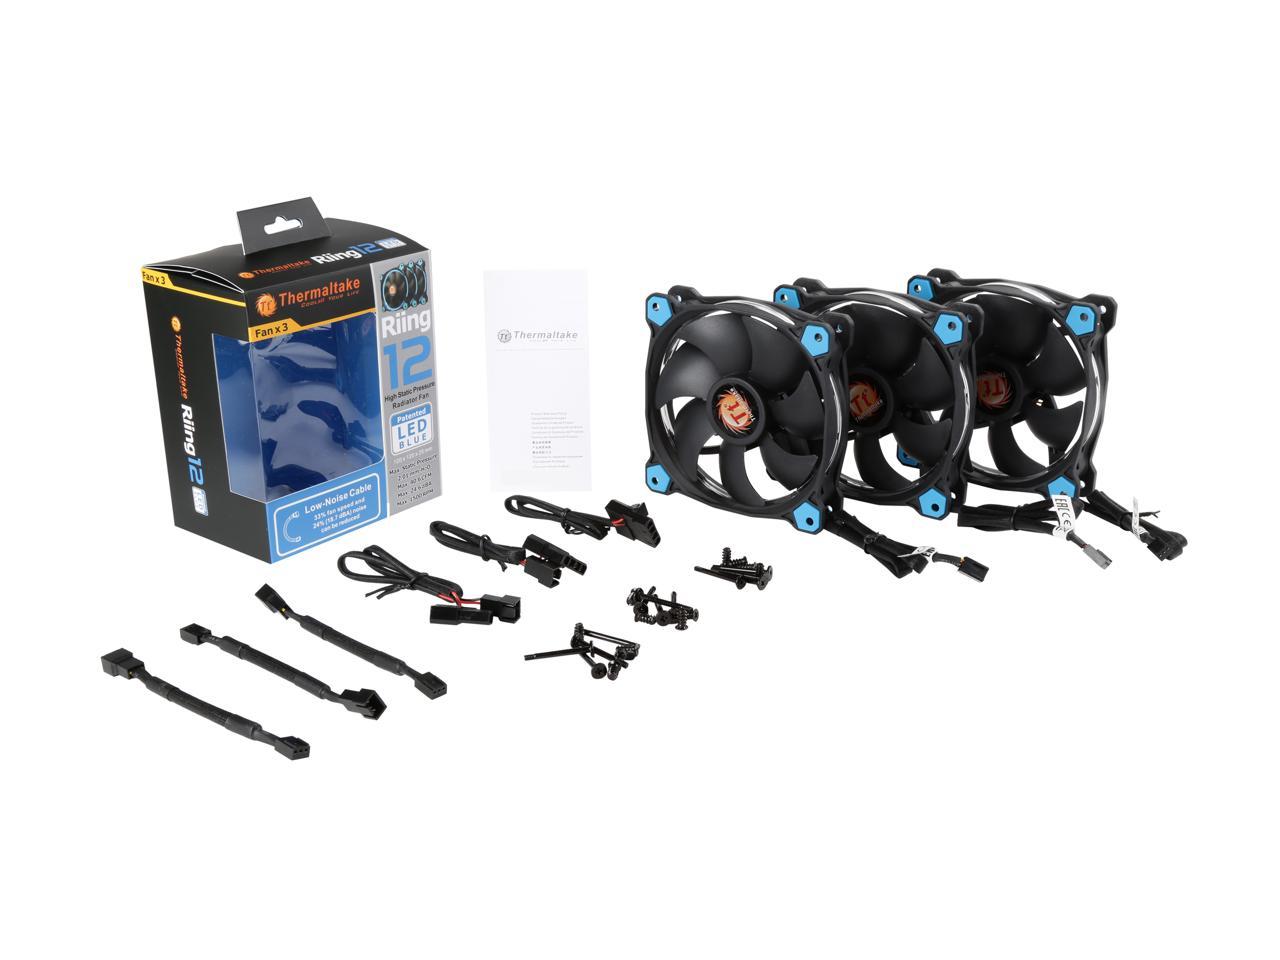 Thermaltake Riing 12 High Static Pressure 120Mm Circular Ring Led Case/Radiator Fan With Anti-Vibration Mounting System - Blue - 3 Pks